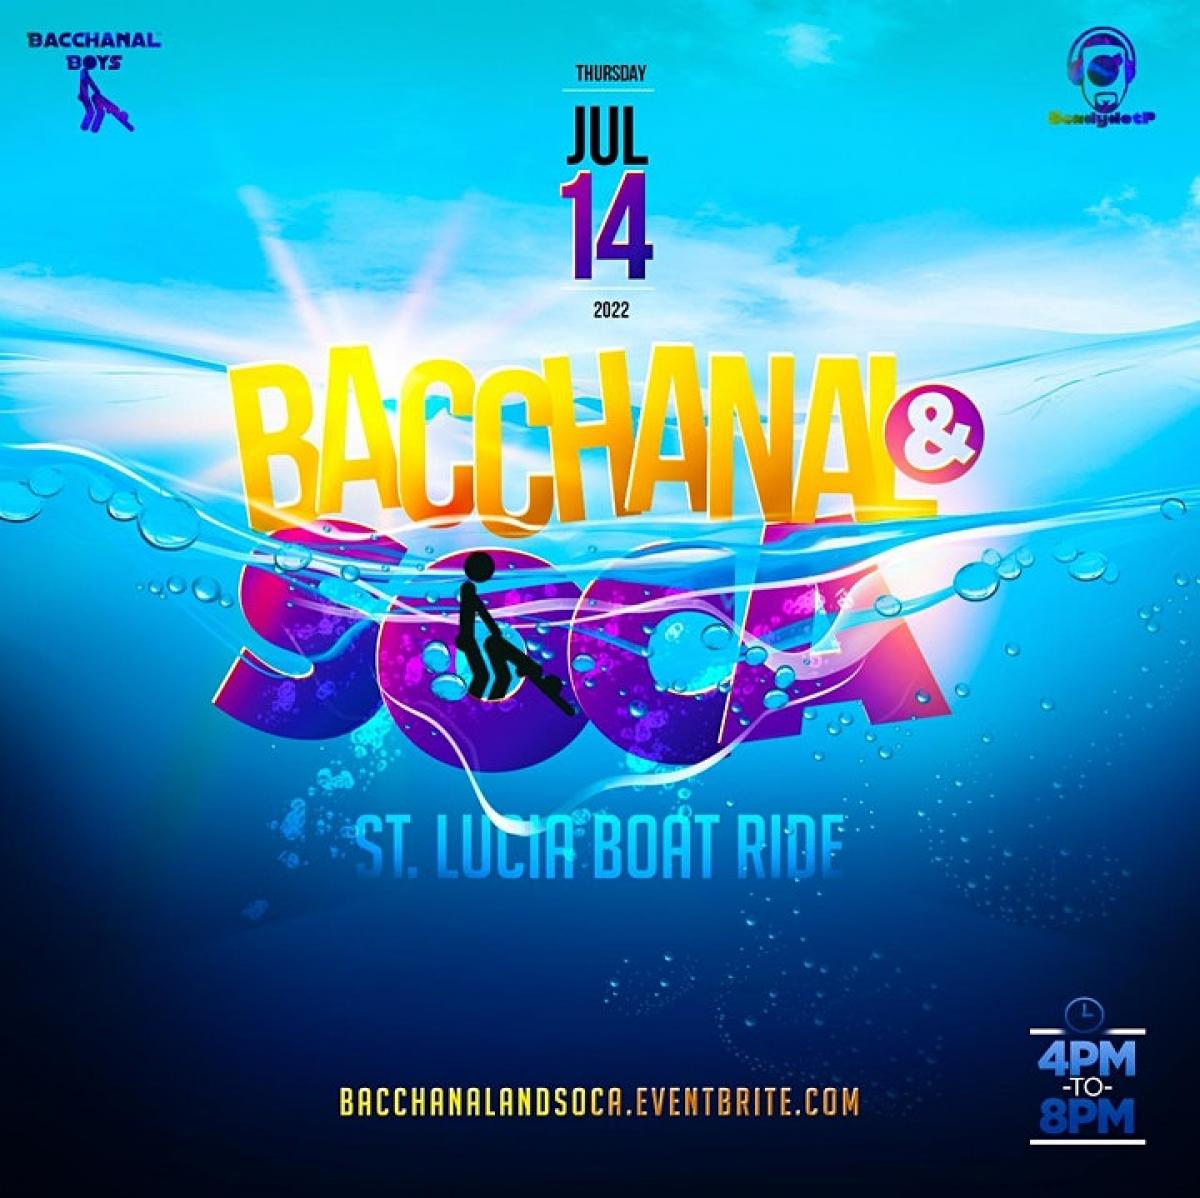 Bacchanal & Soca St. Lucia flyer or graphic.